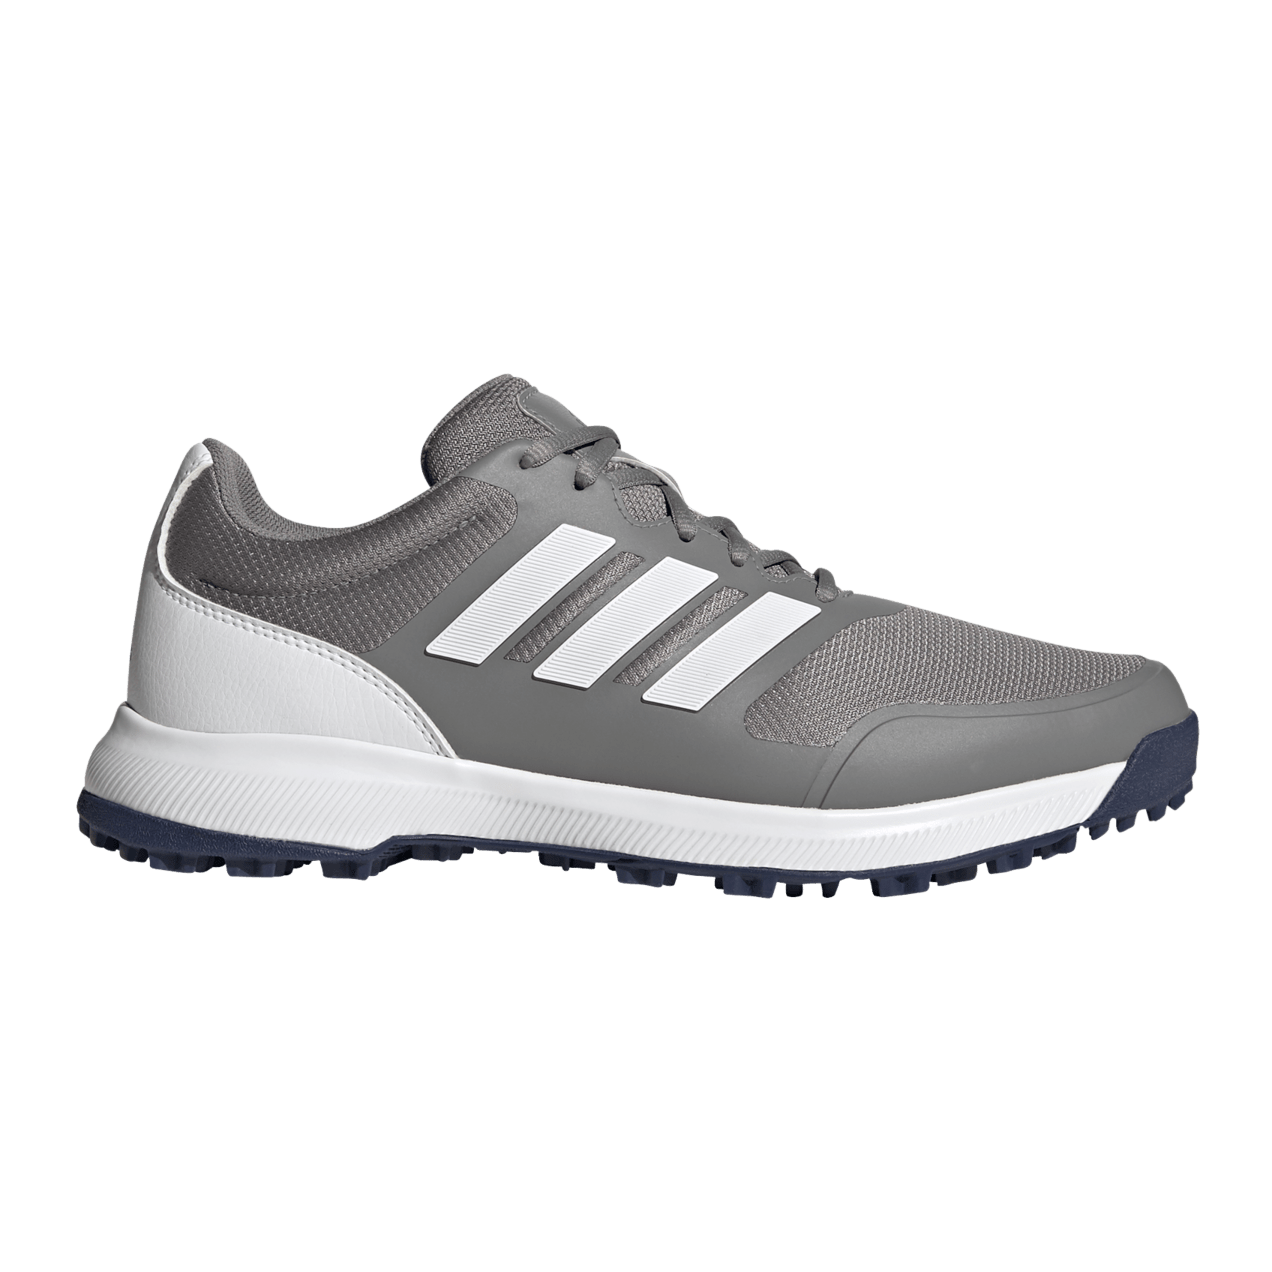 Adidas Tech Response Review Top Sellers, SAVE - aveclumiere.com